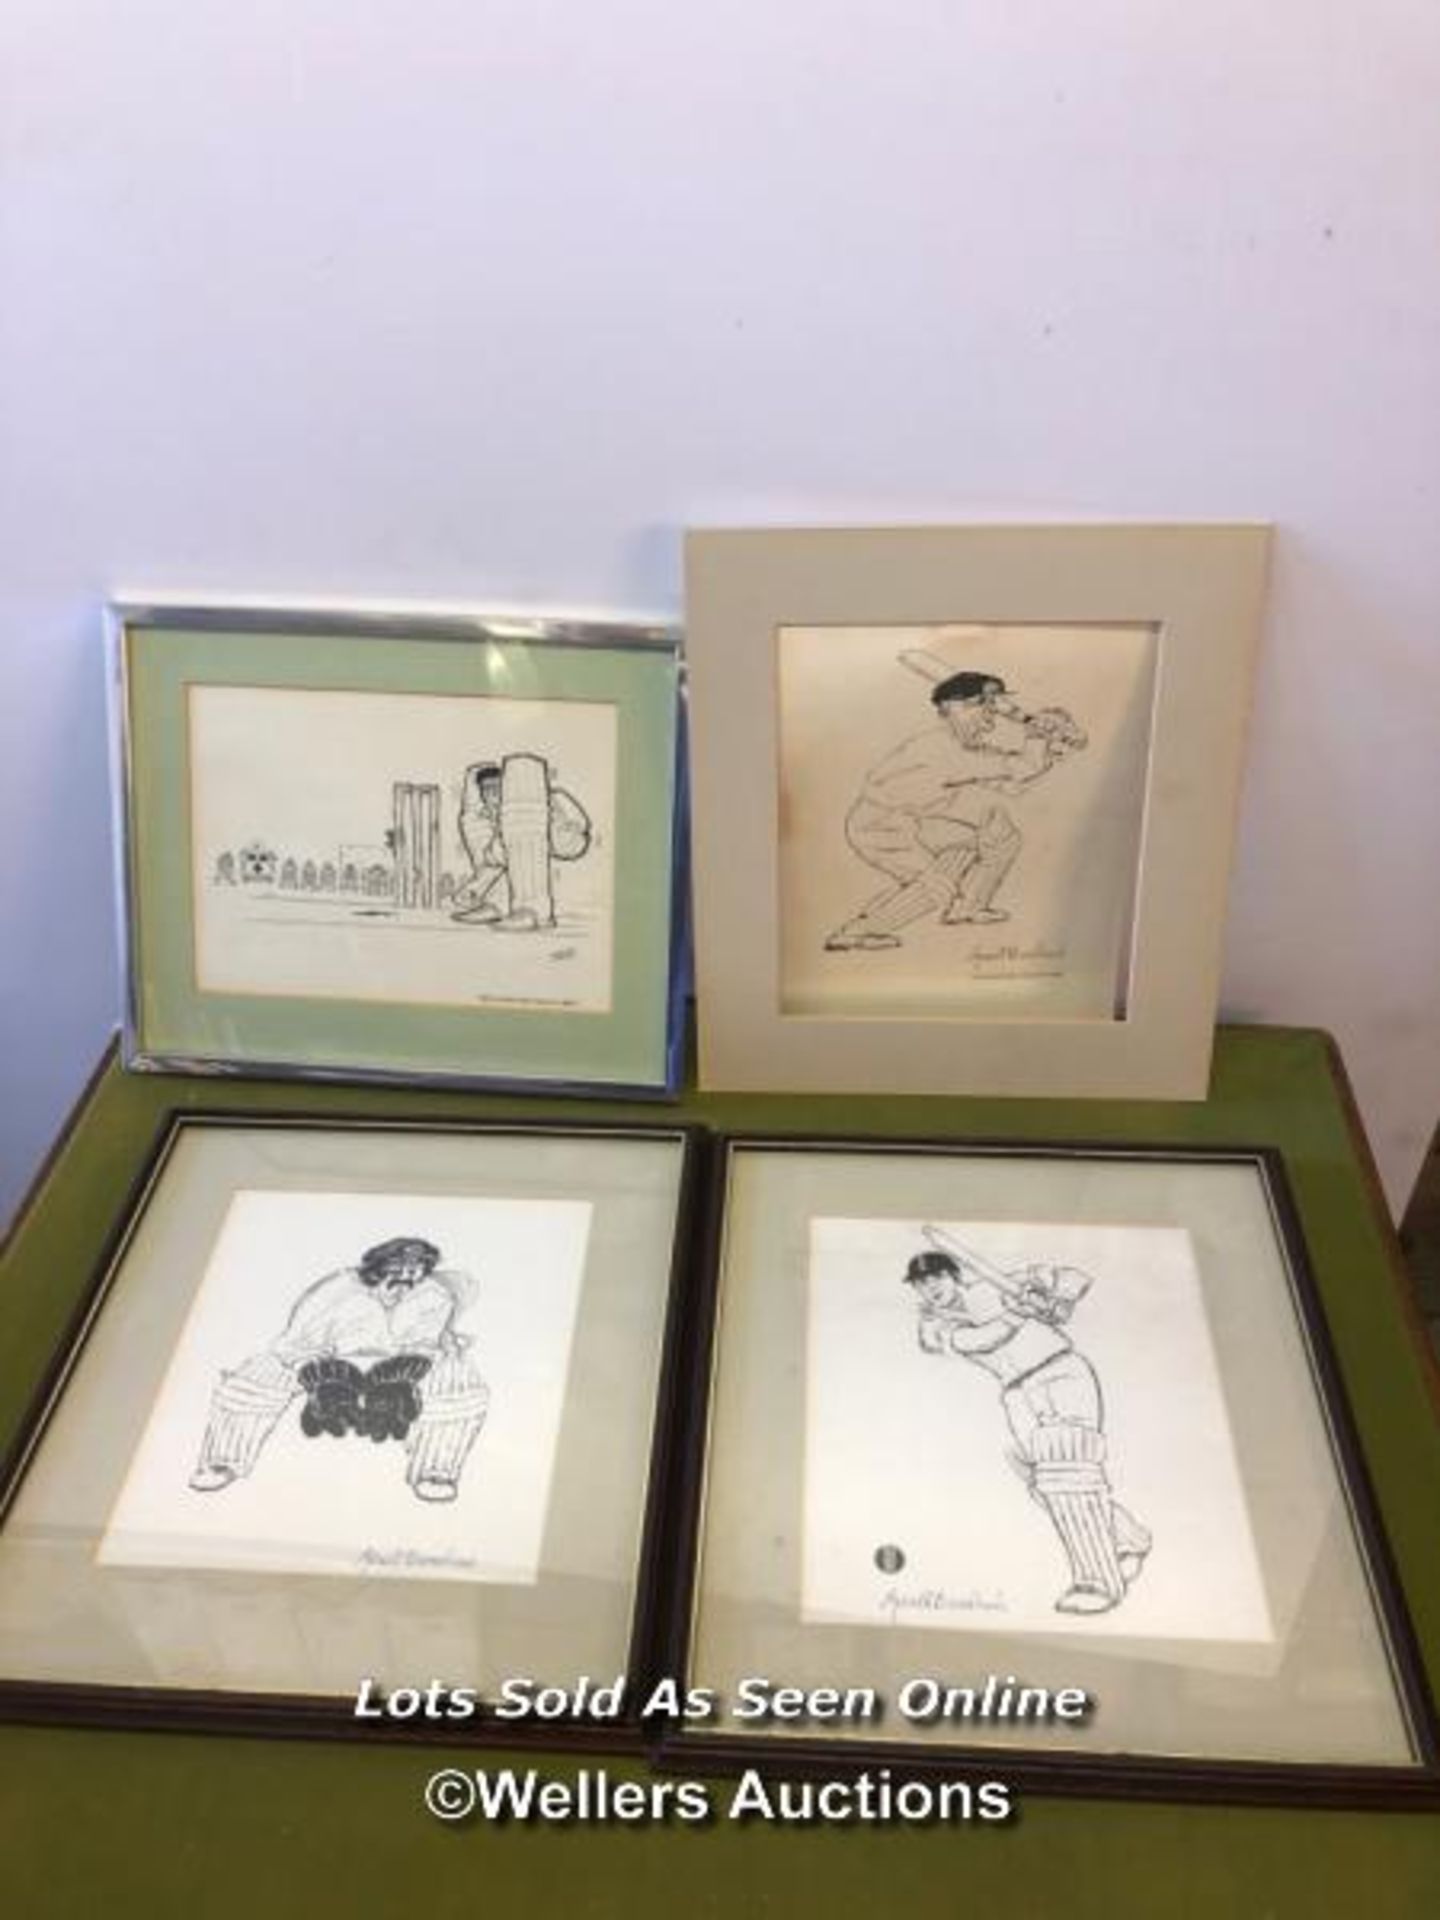 THREE FRAMED AND GLAZED PRINTS OF CARTOONS OF CRICKET SCENES, TOGETHER WITH ONE UNFRAMED